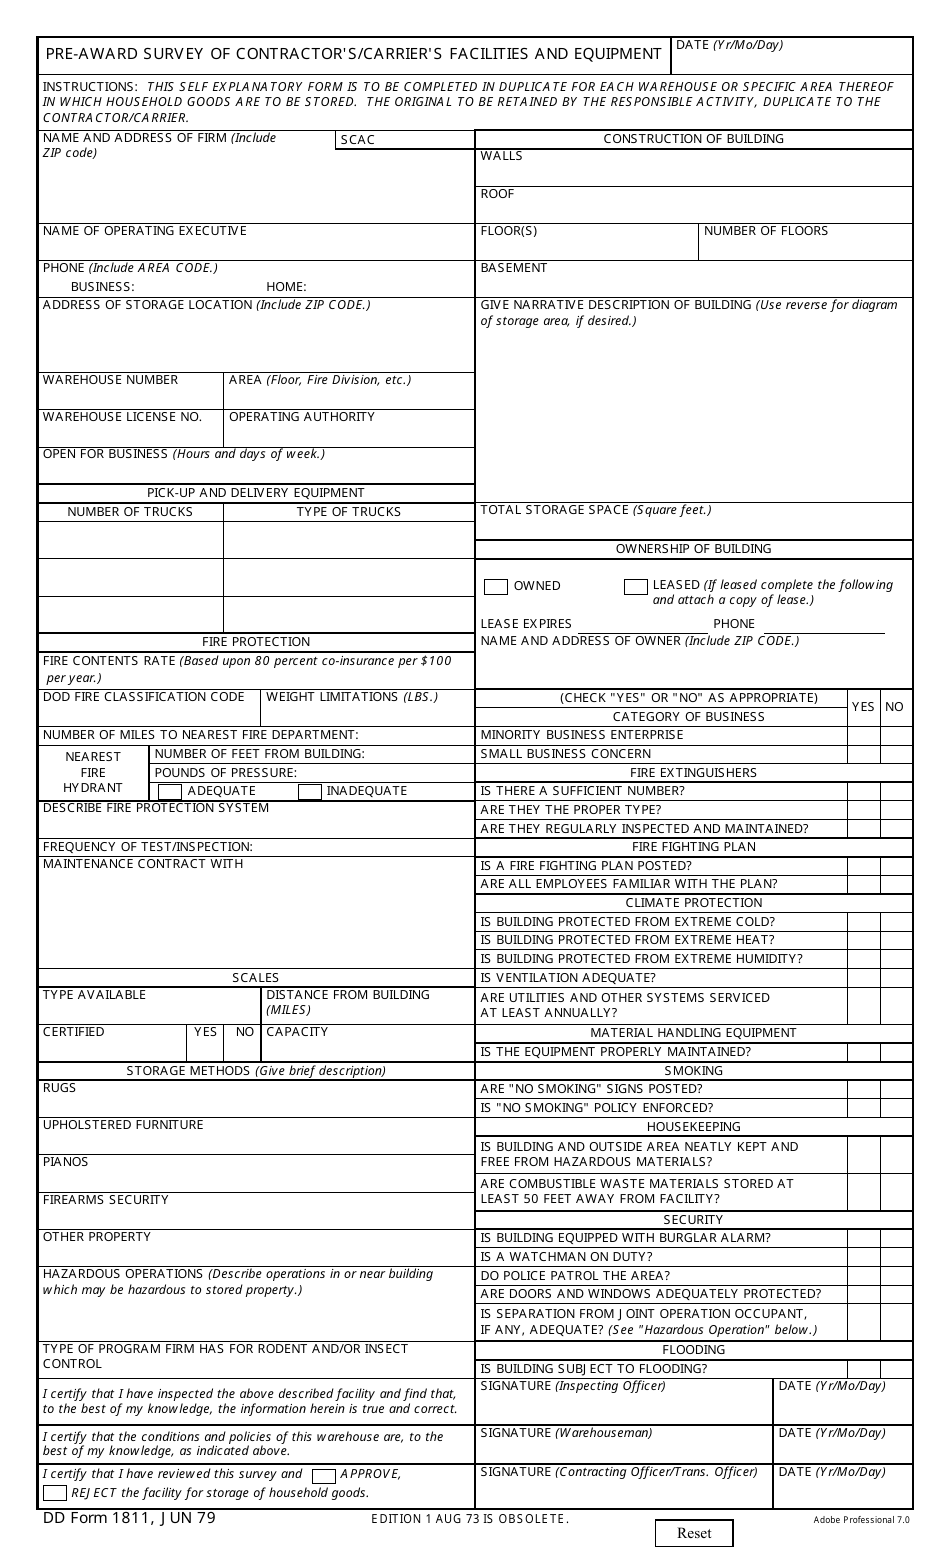 DD Form 1811 Pre-award Survey of Contractors / Carriers Facilities and Equipment, Page 1